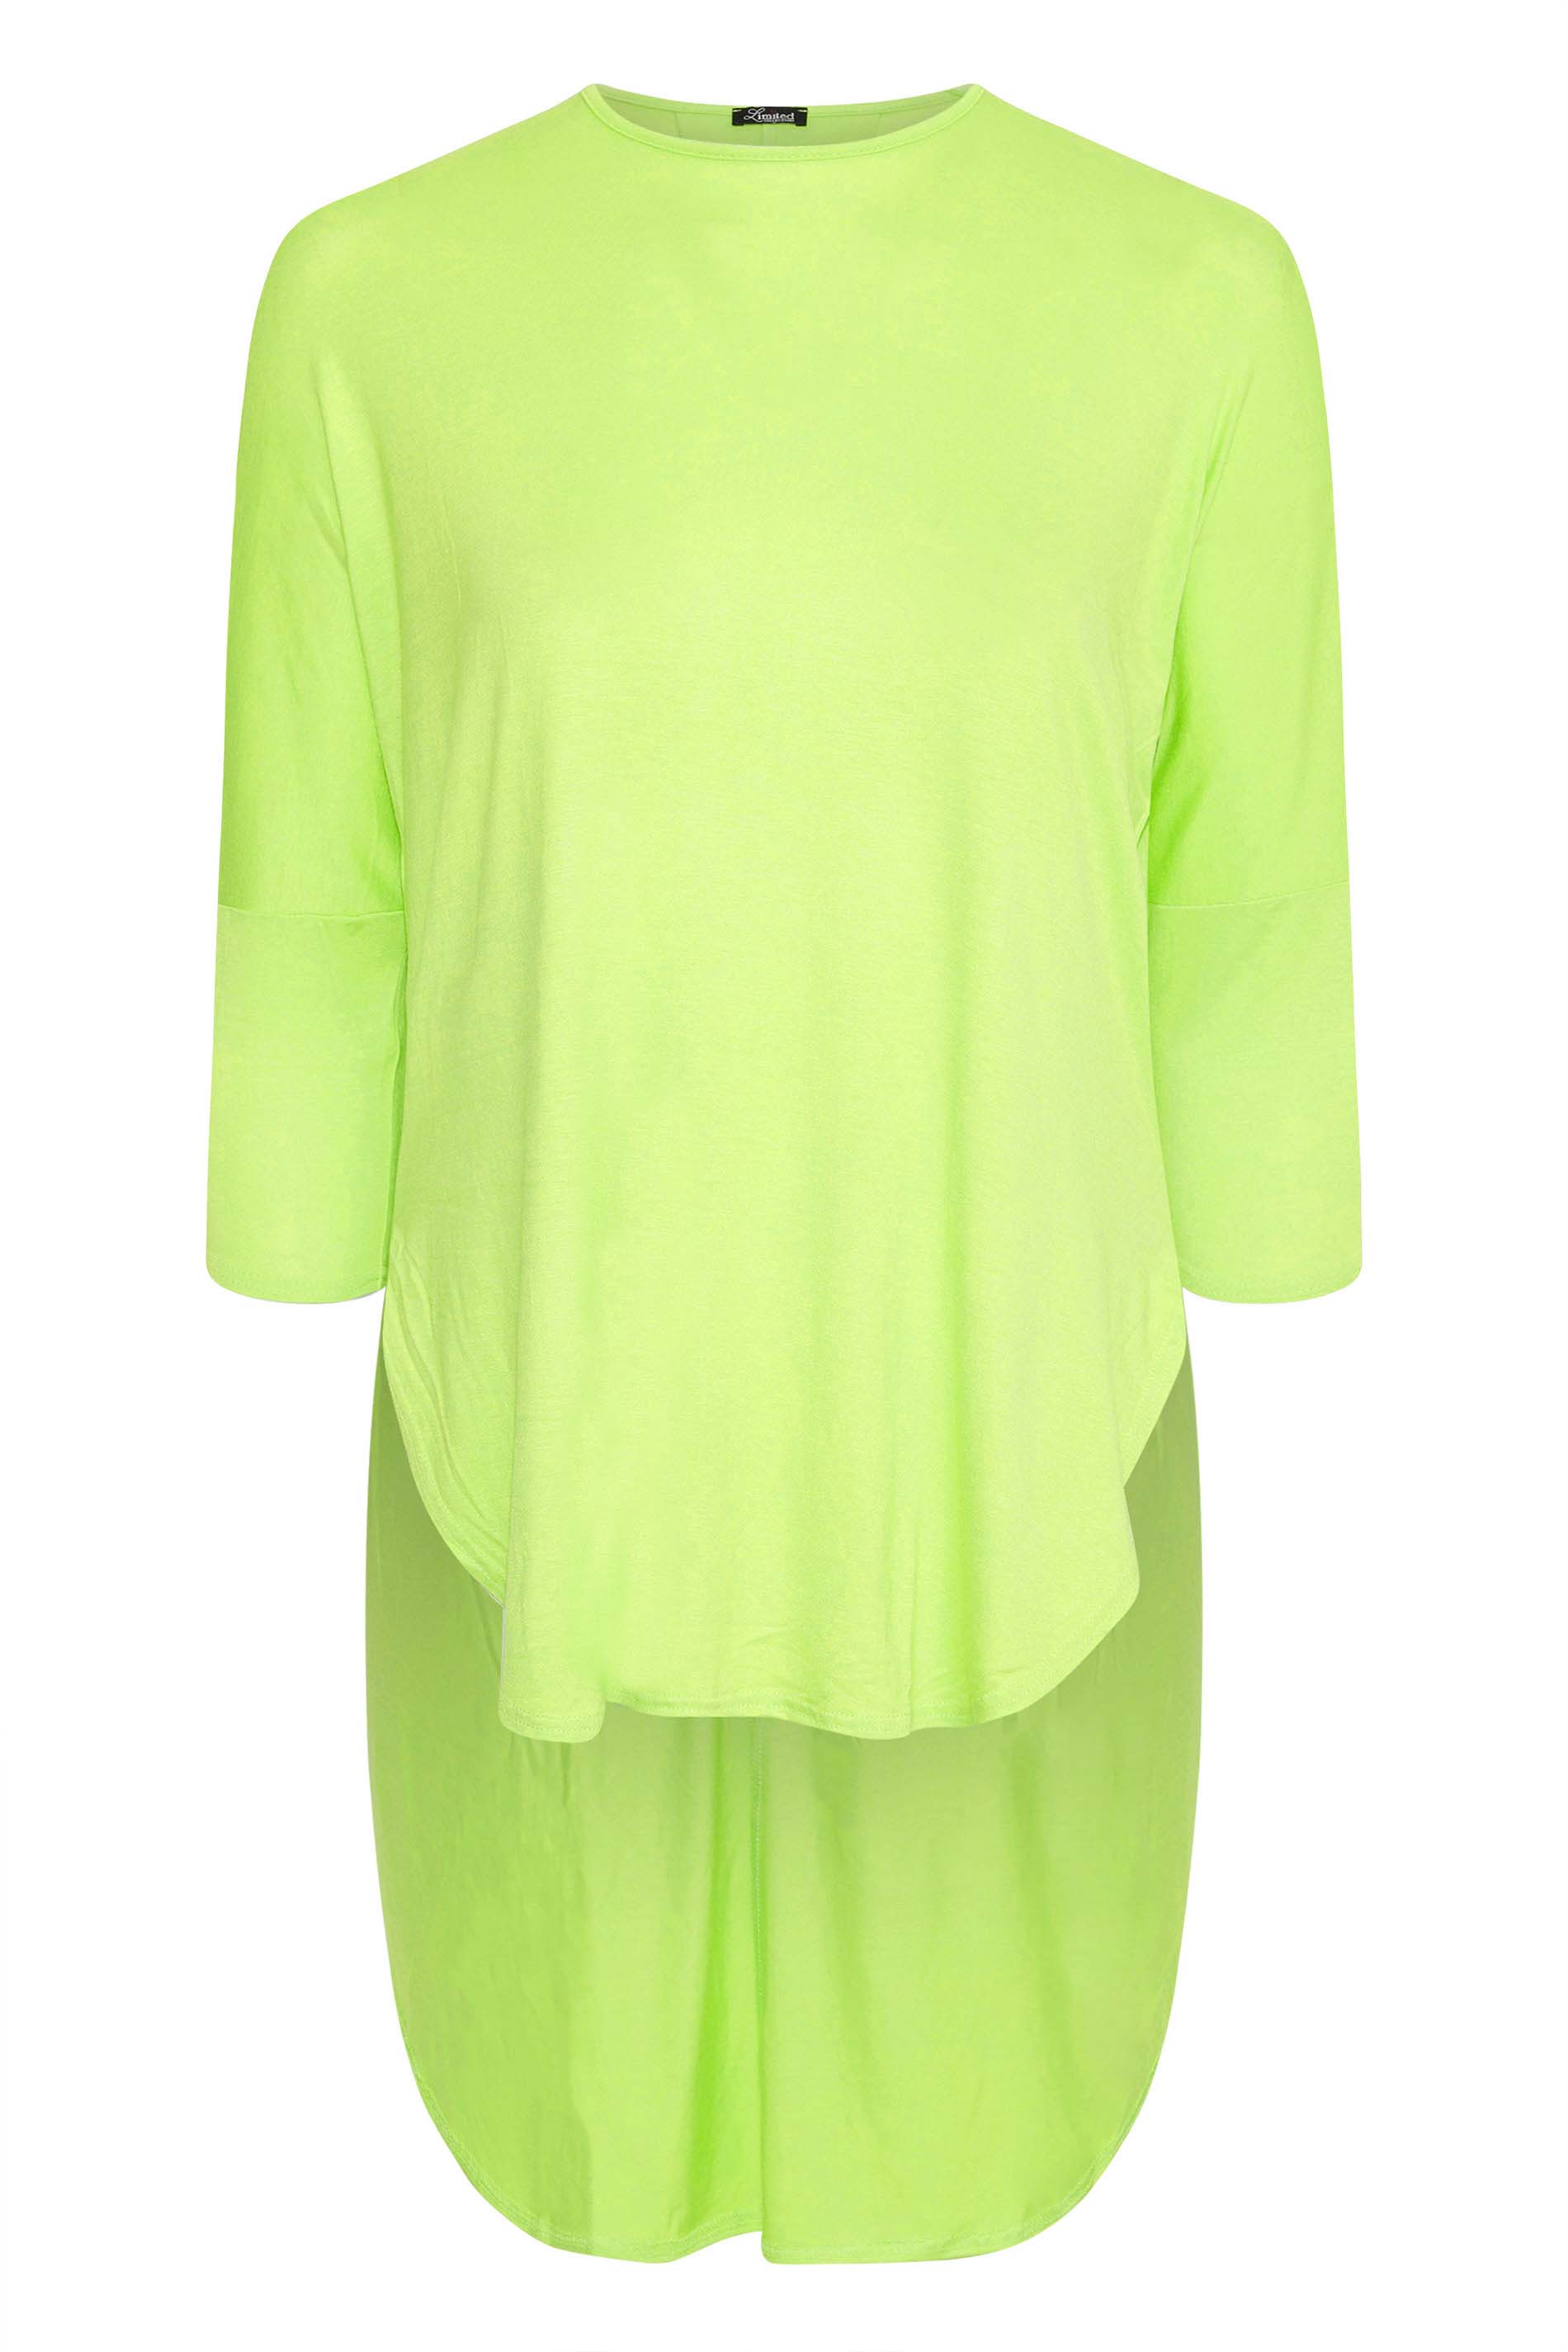 Grande taille  Tops Grande taille  Tops Ourlet Plongeant | LIMITED COLLECTION - T-Shirt Vert Citron Manches Longues Ourlet Plongeant - MD45183